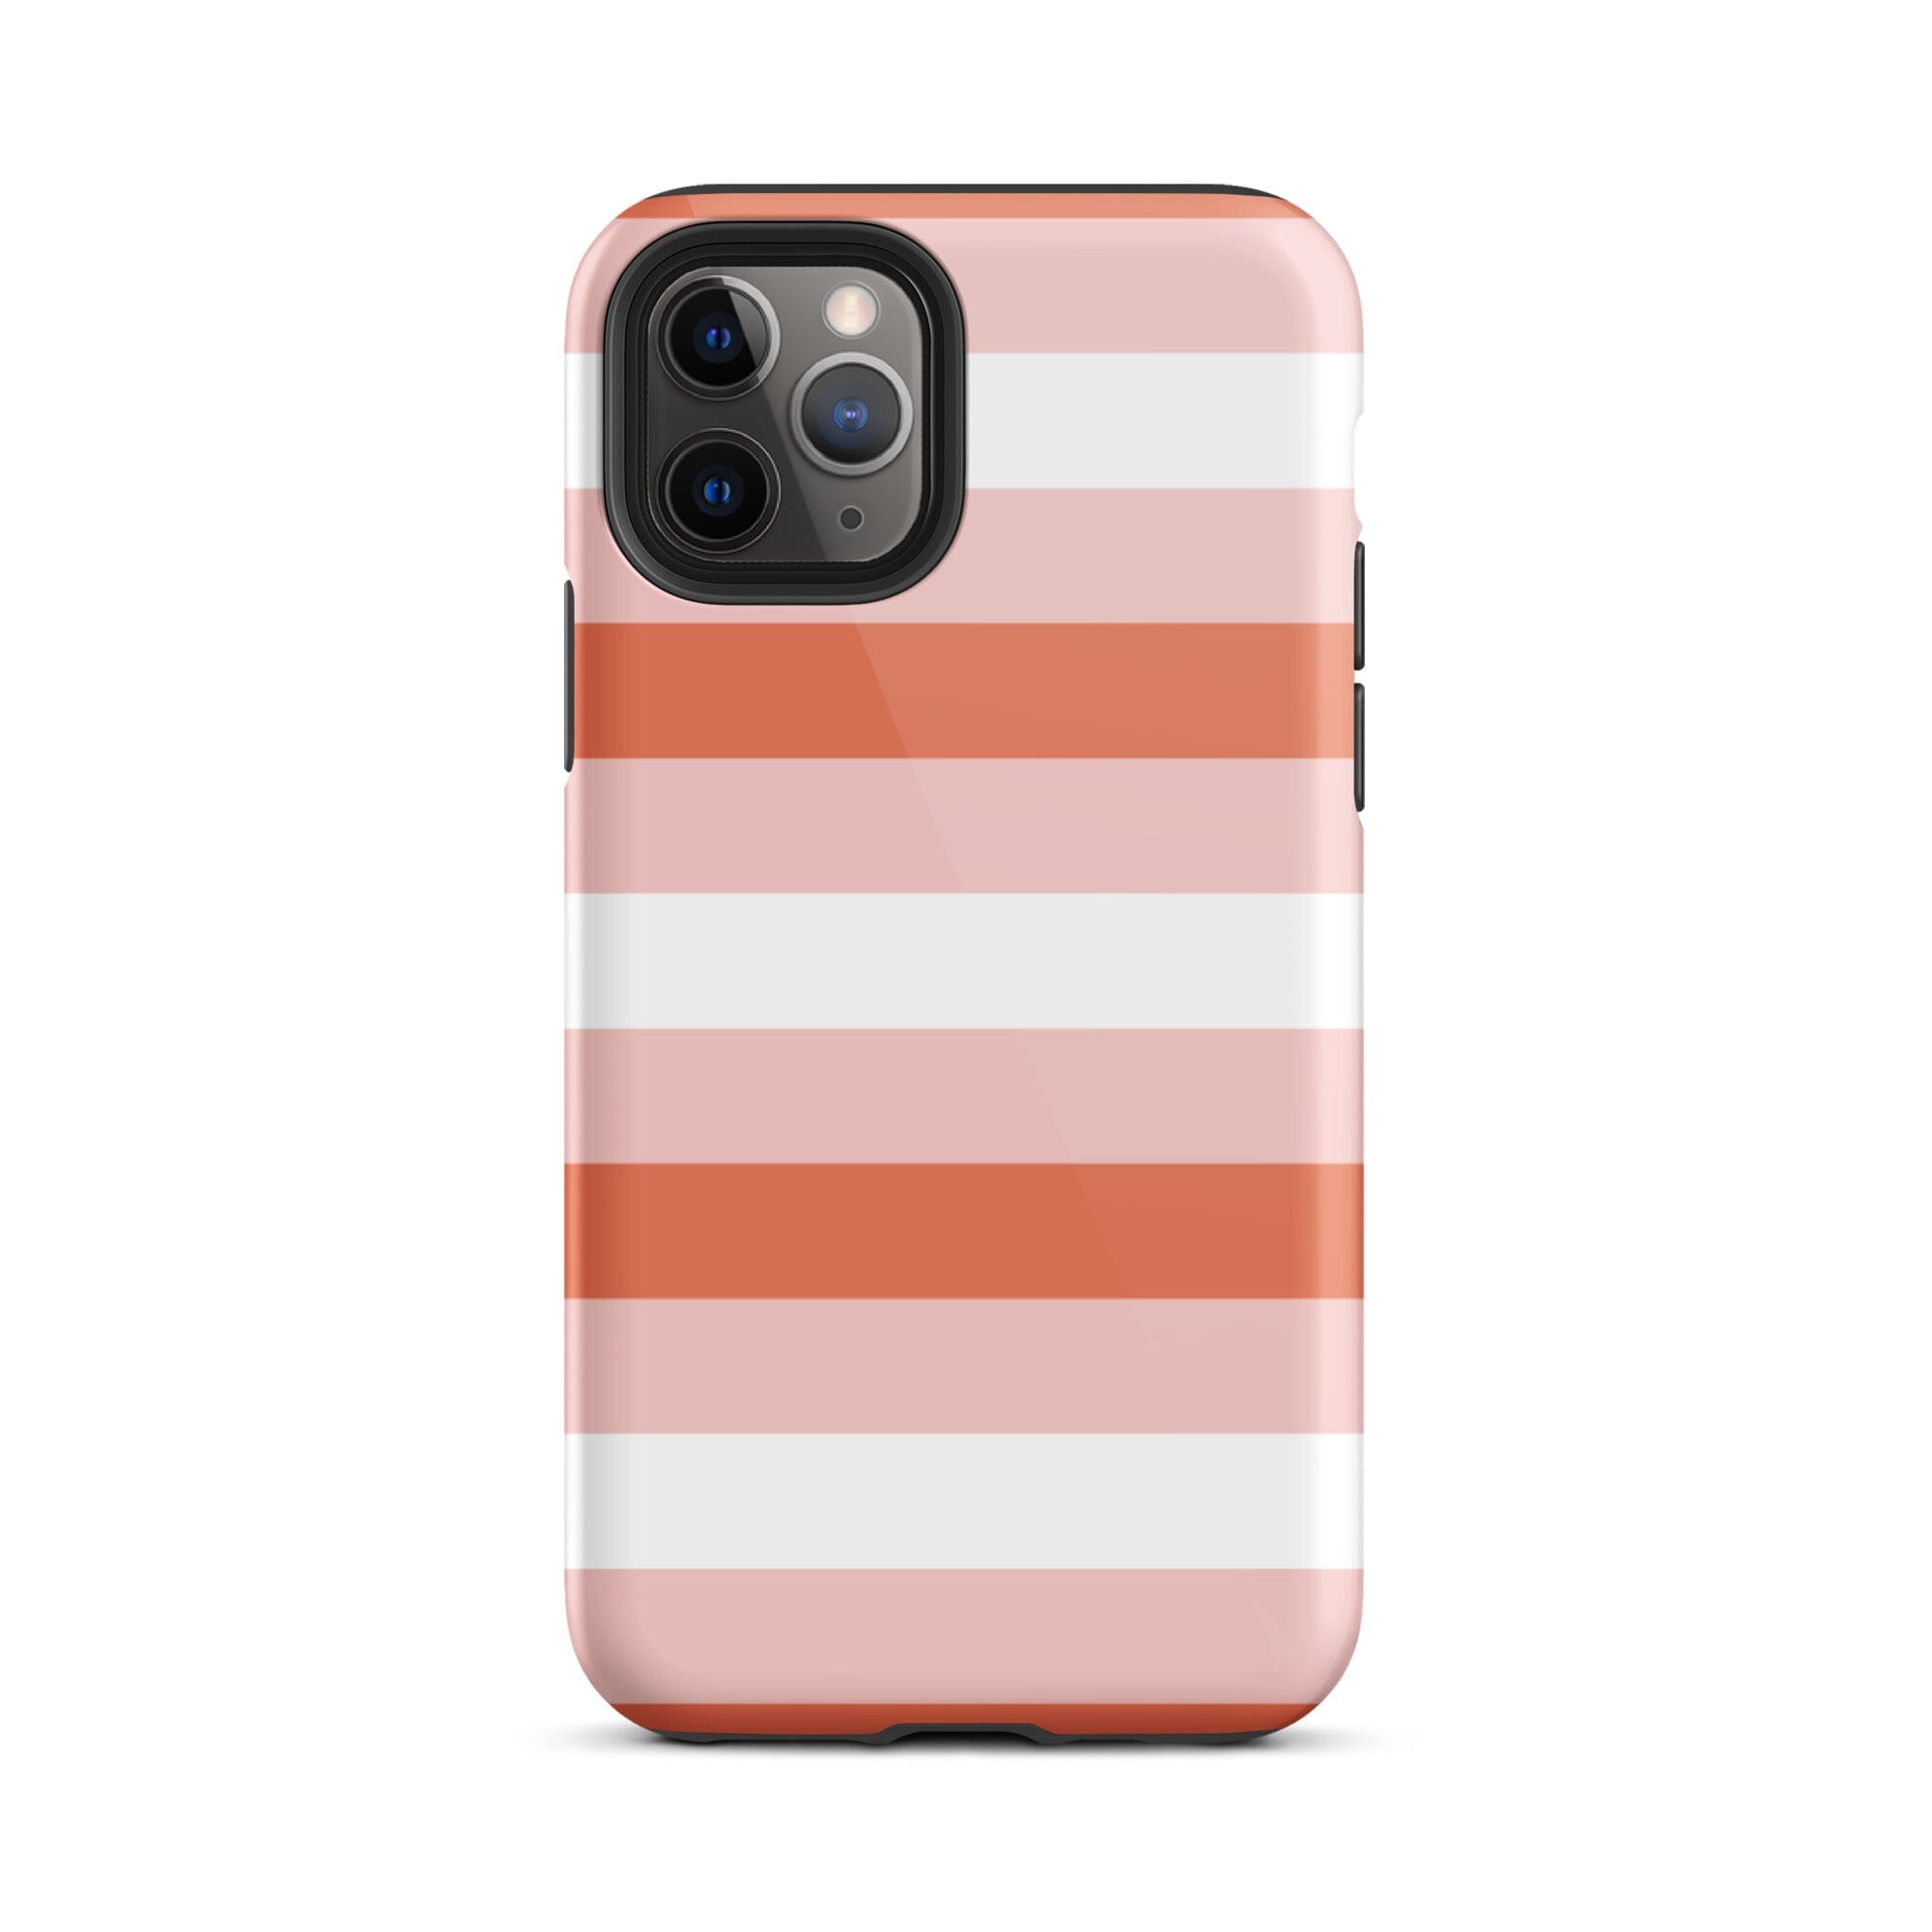 Sweet Stripes iPhone Case Knitted Belle Boutique iPhone 11 